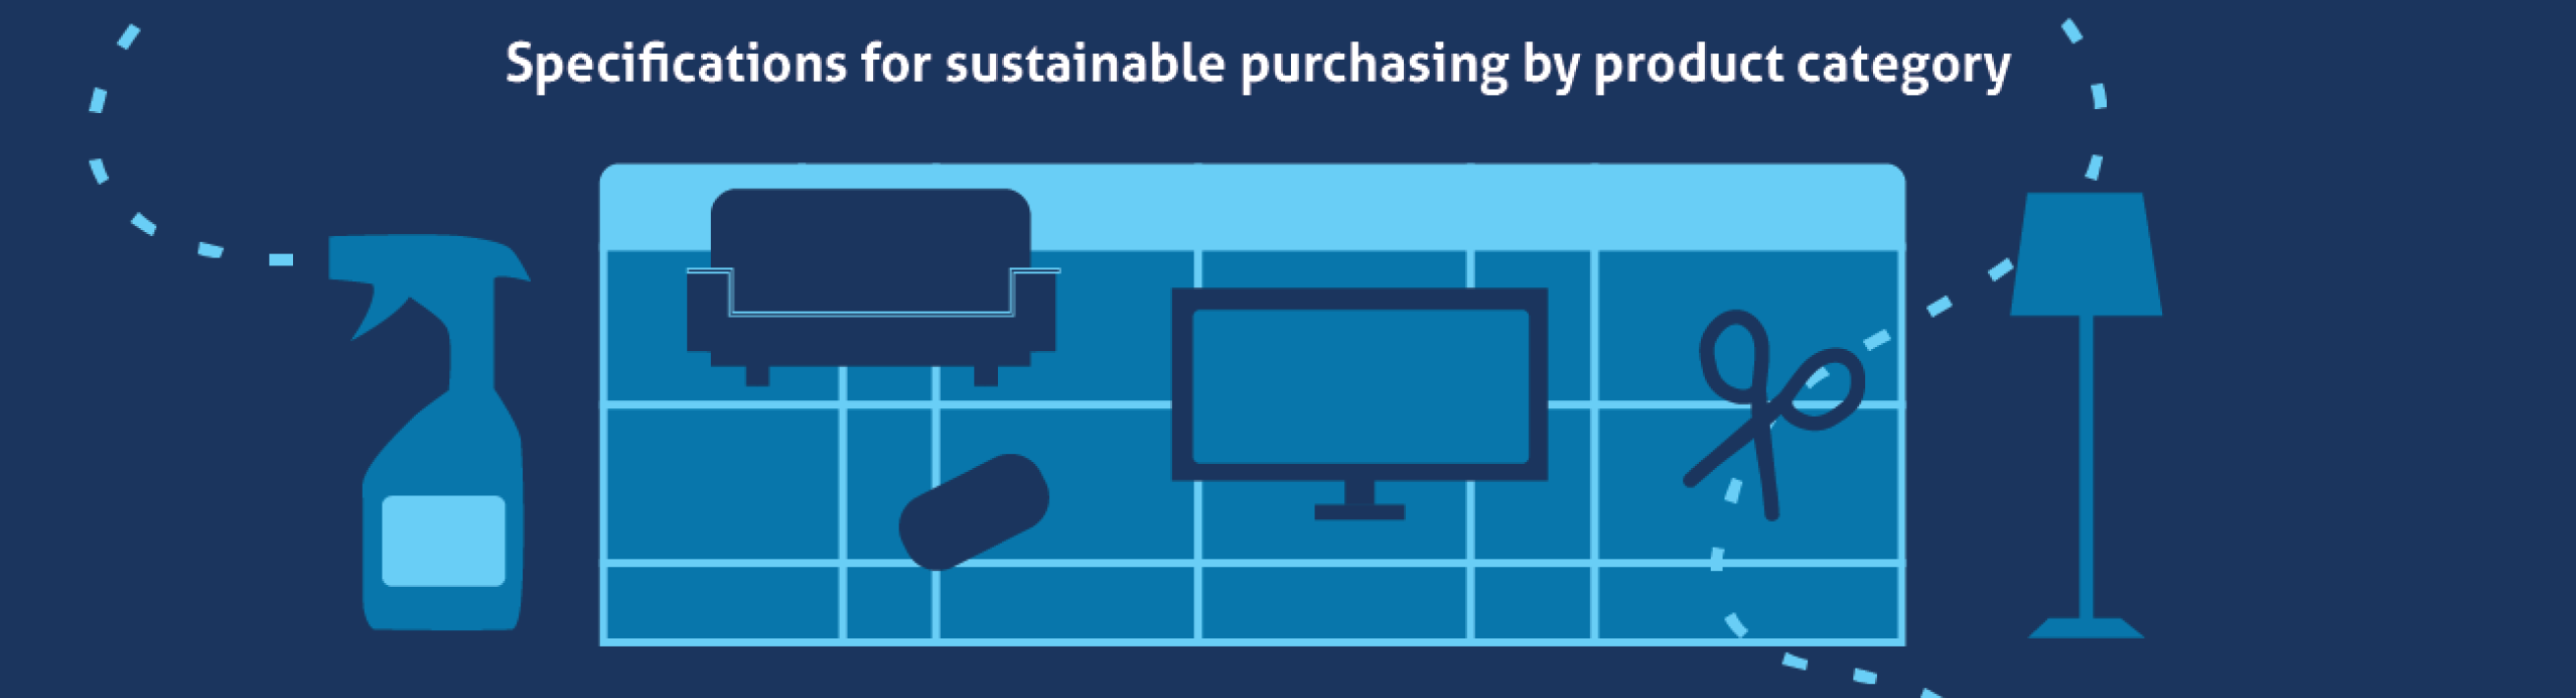 Specifications for sustainable purchasing by product category